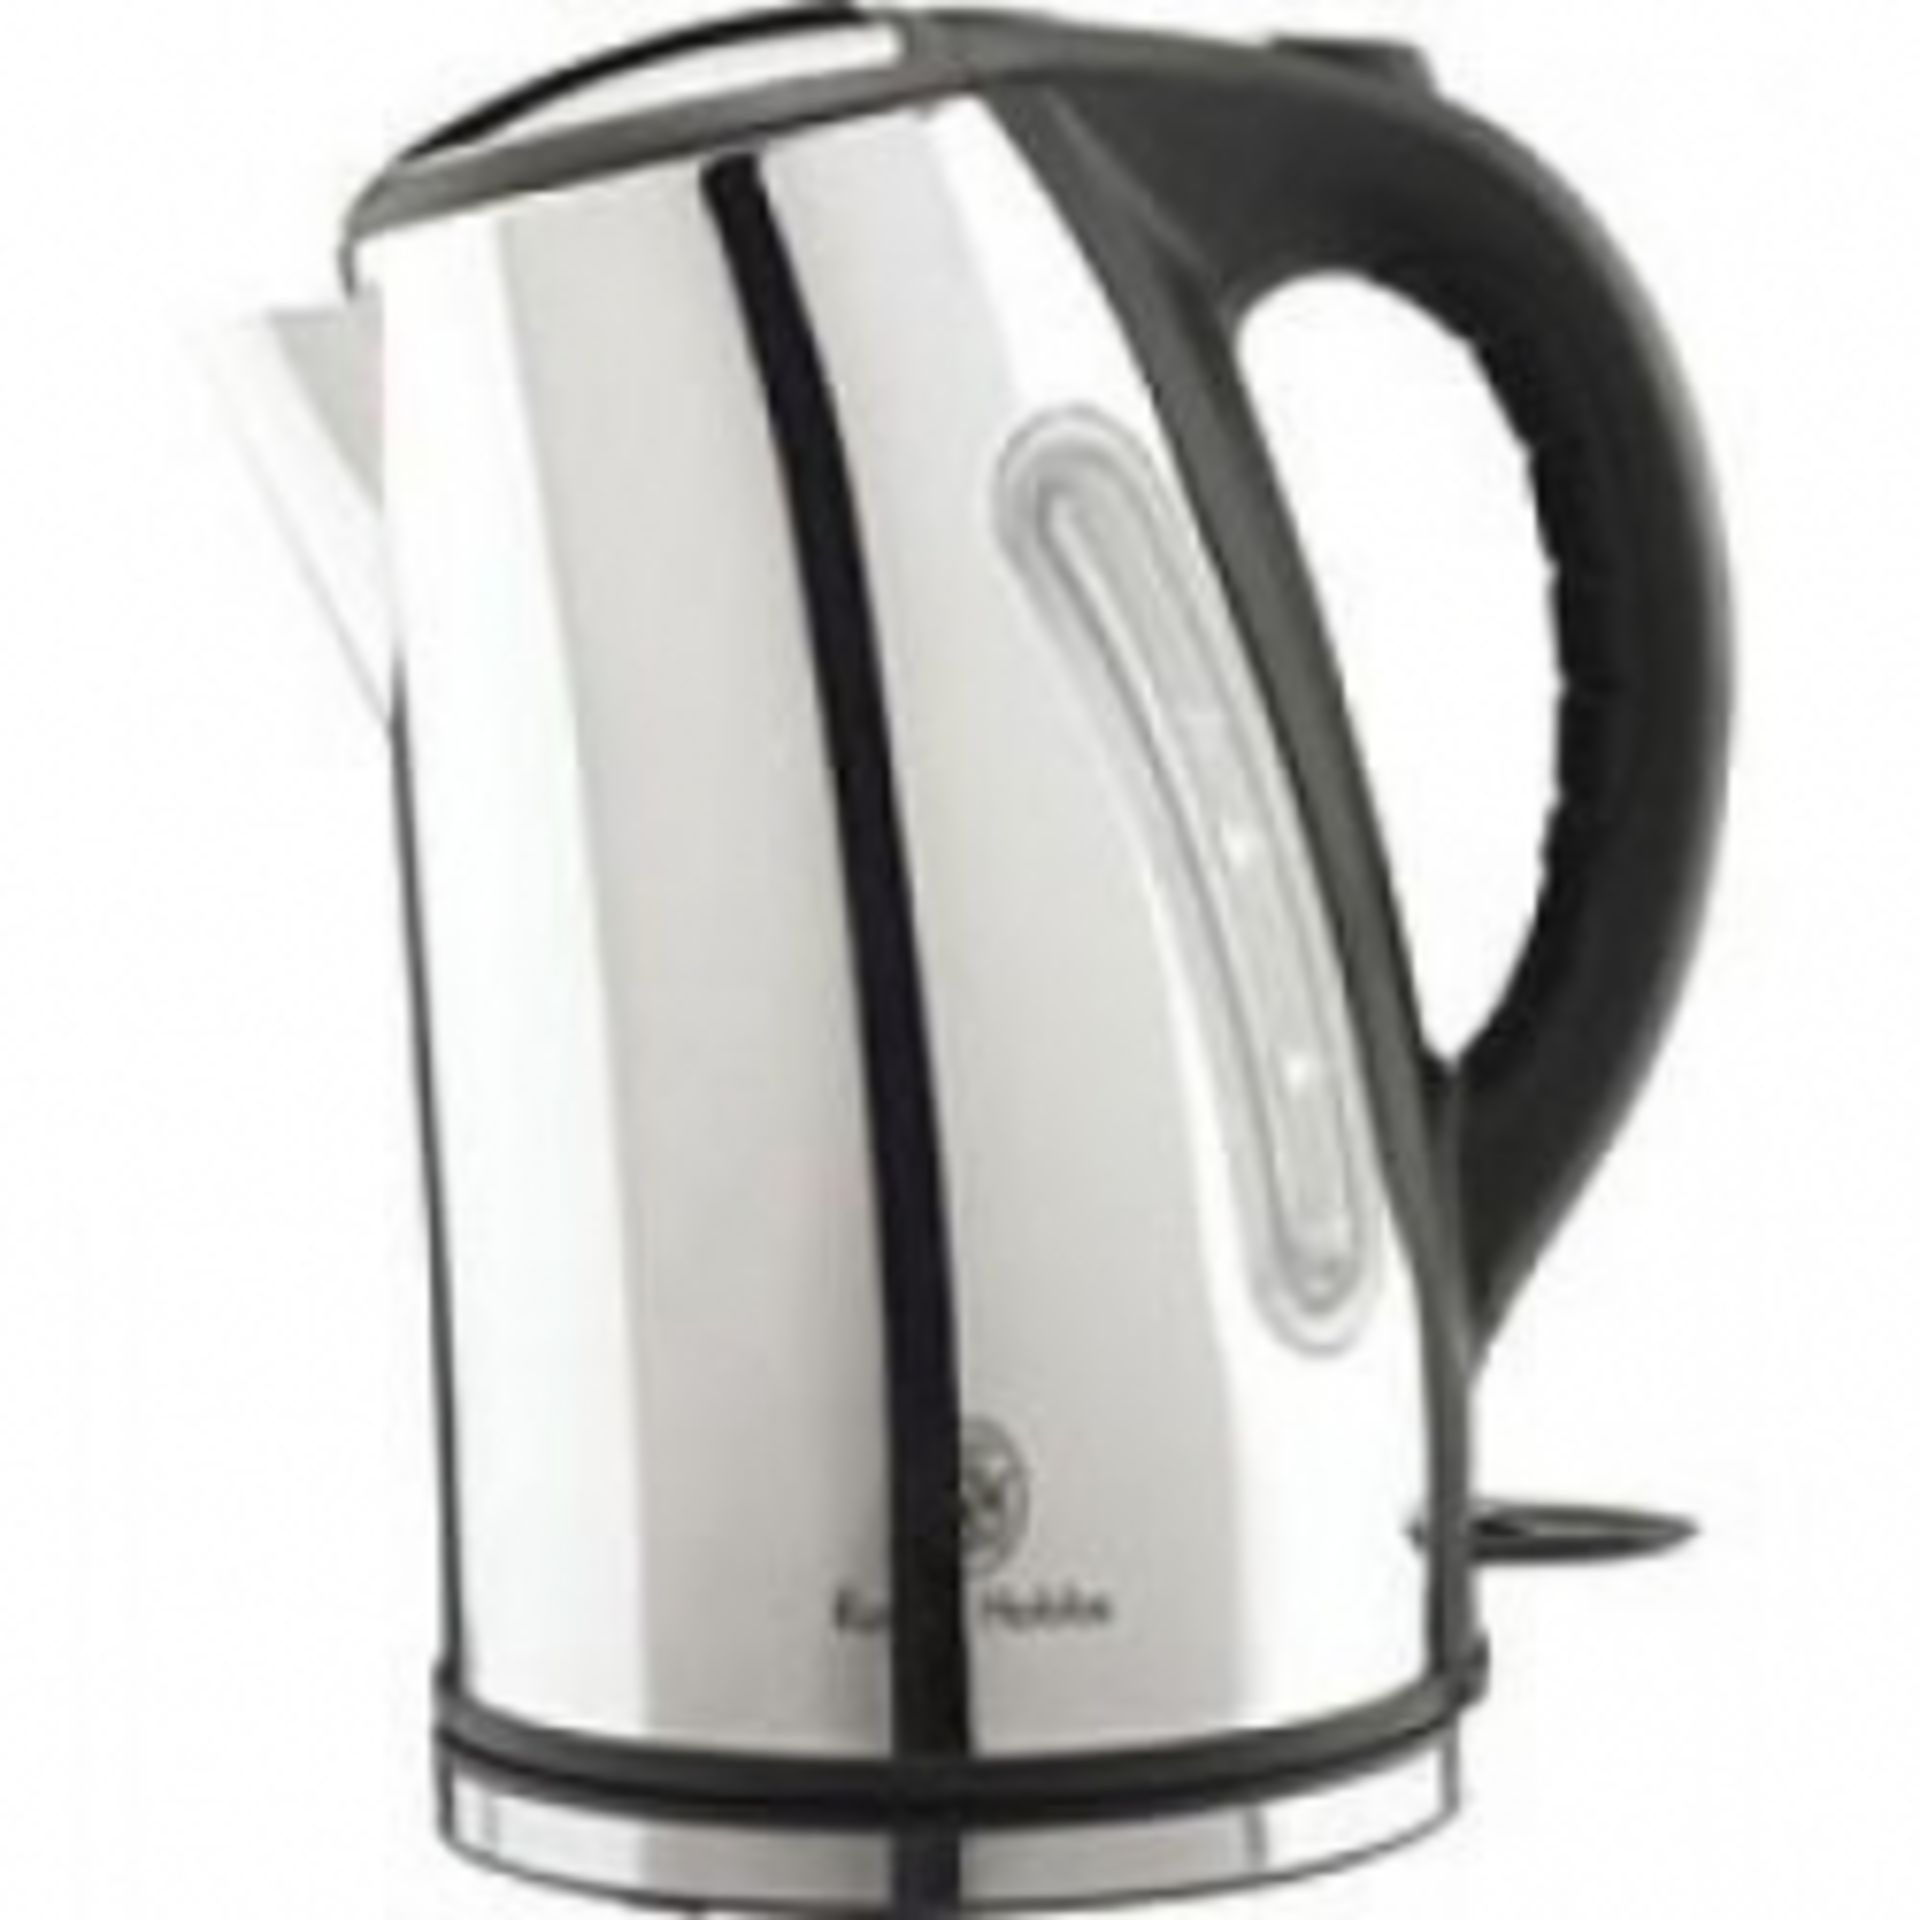 V Brand New Russell Hobbs Alderley Kettle 1.7L RRP £39.99 X  2  Bid price to be multiplied by Two